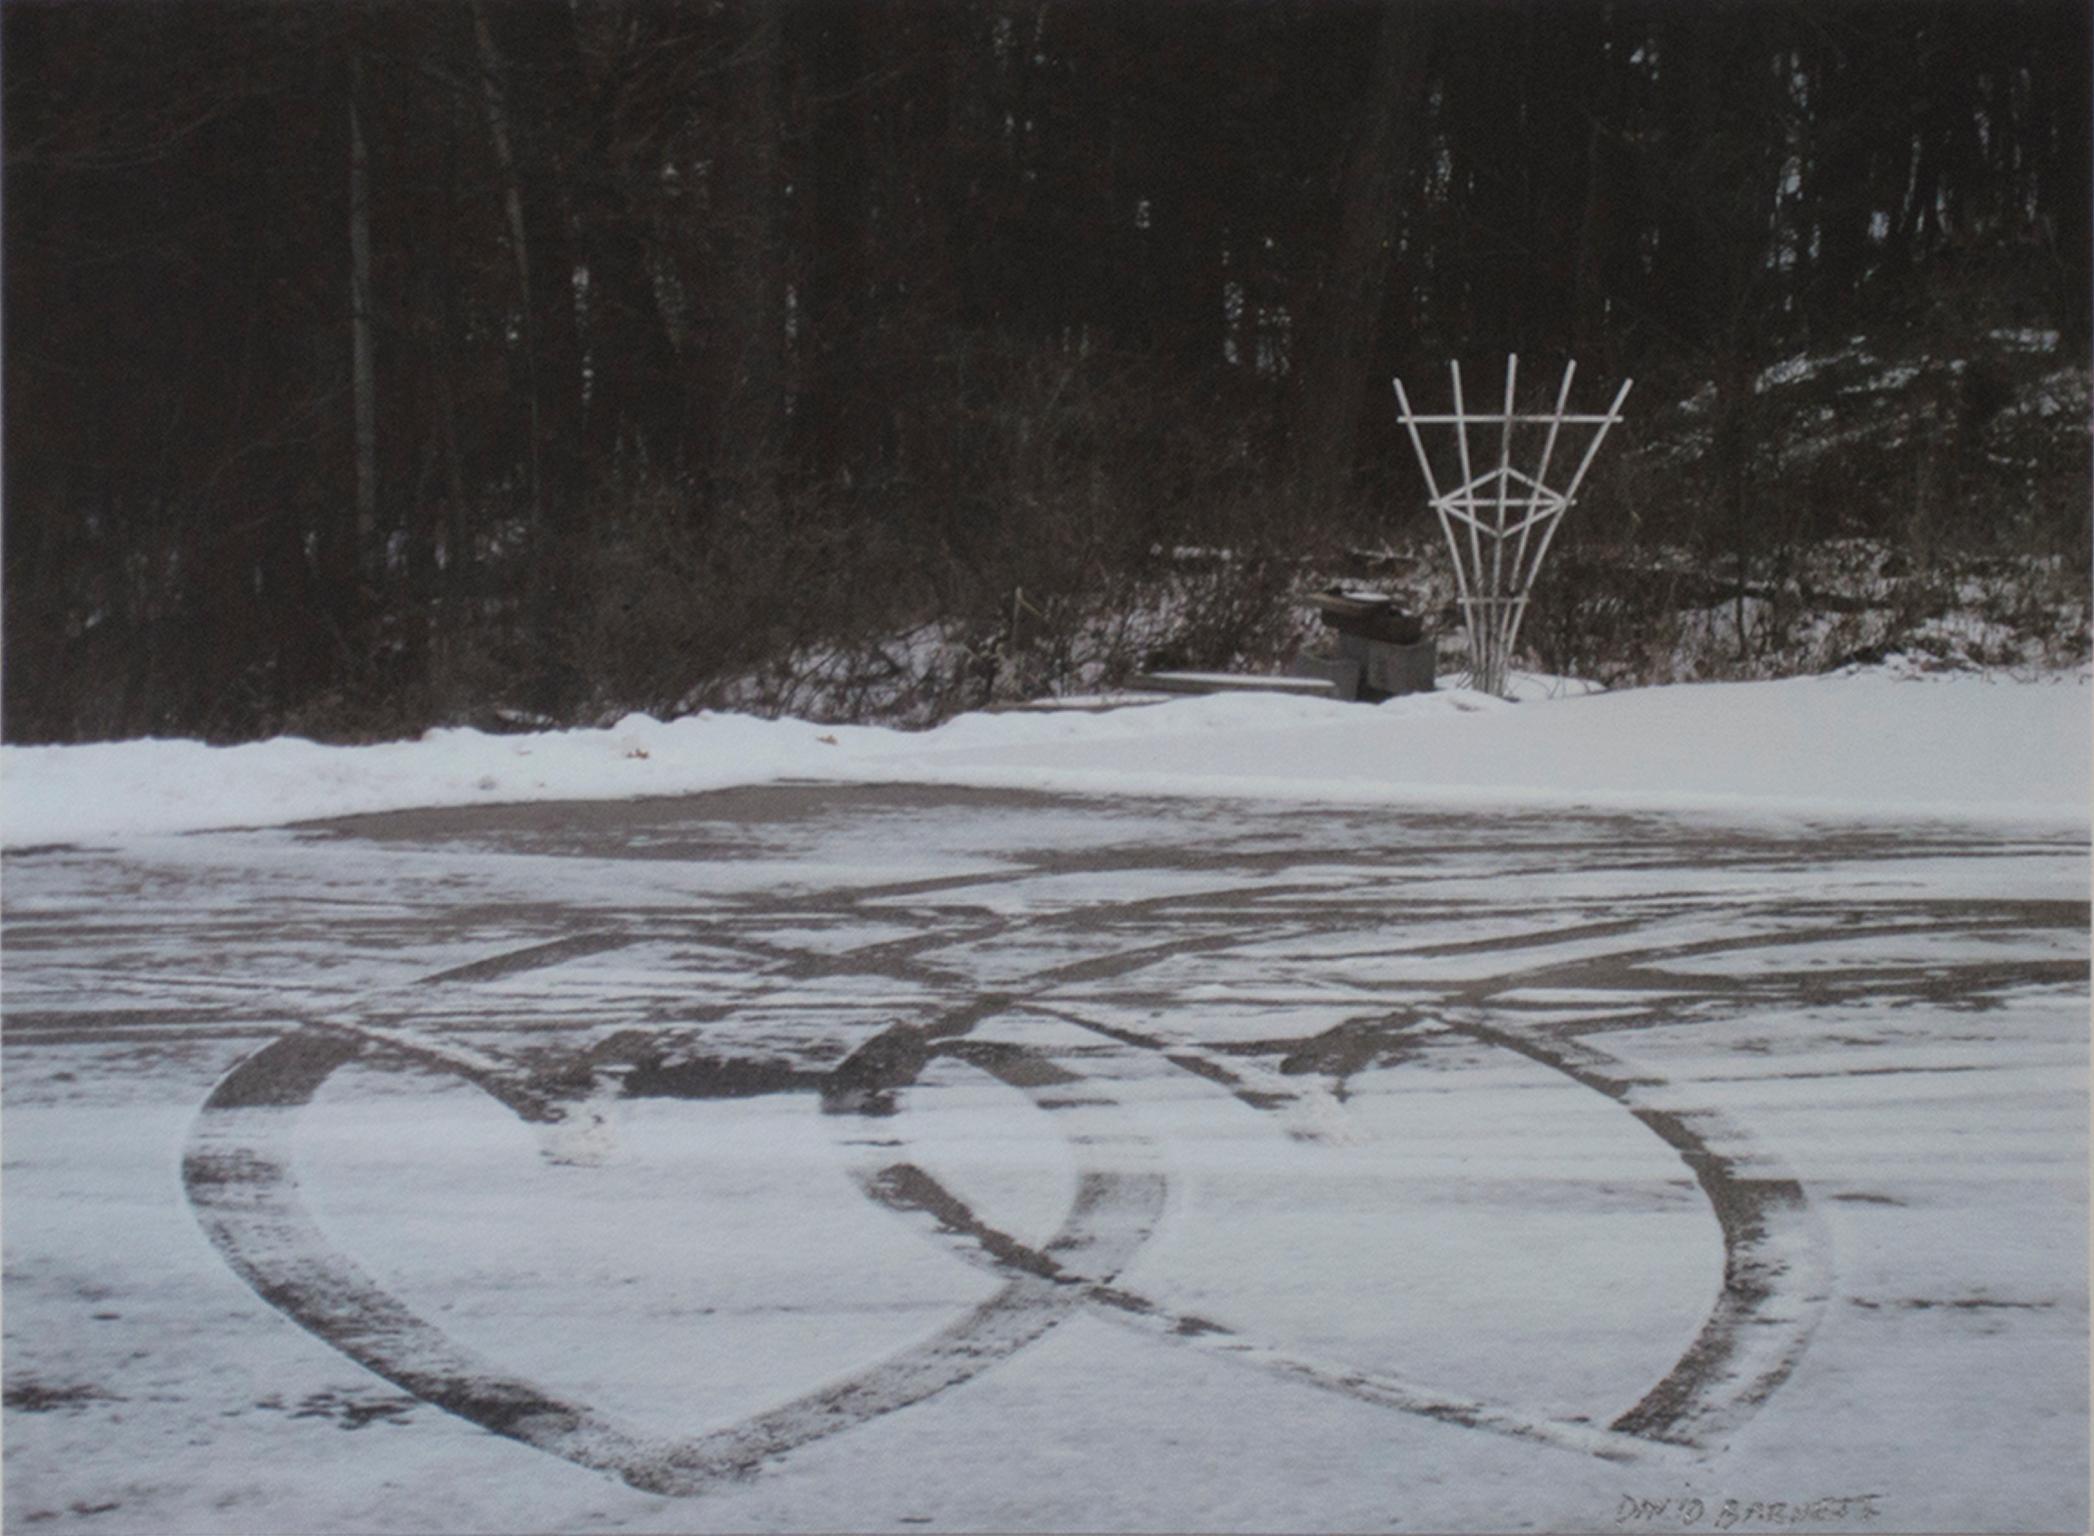 "Tracks of Love" is an original fine-art photograph shot in black and white by David Barnett. It is signed in the lower right corner. It depicts a frozen lake with ice-skater tracks forming two looping hearts.

Art size: 9 5/8" x 12 7/8"
Frame size: